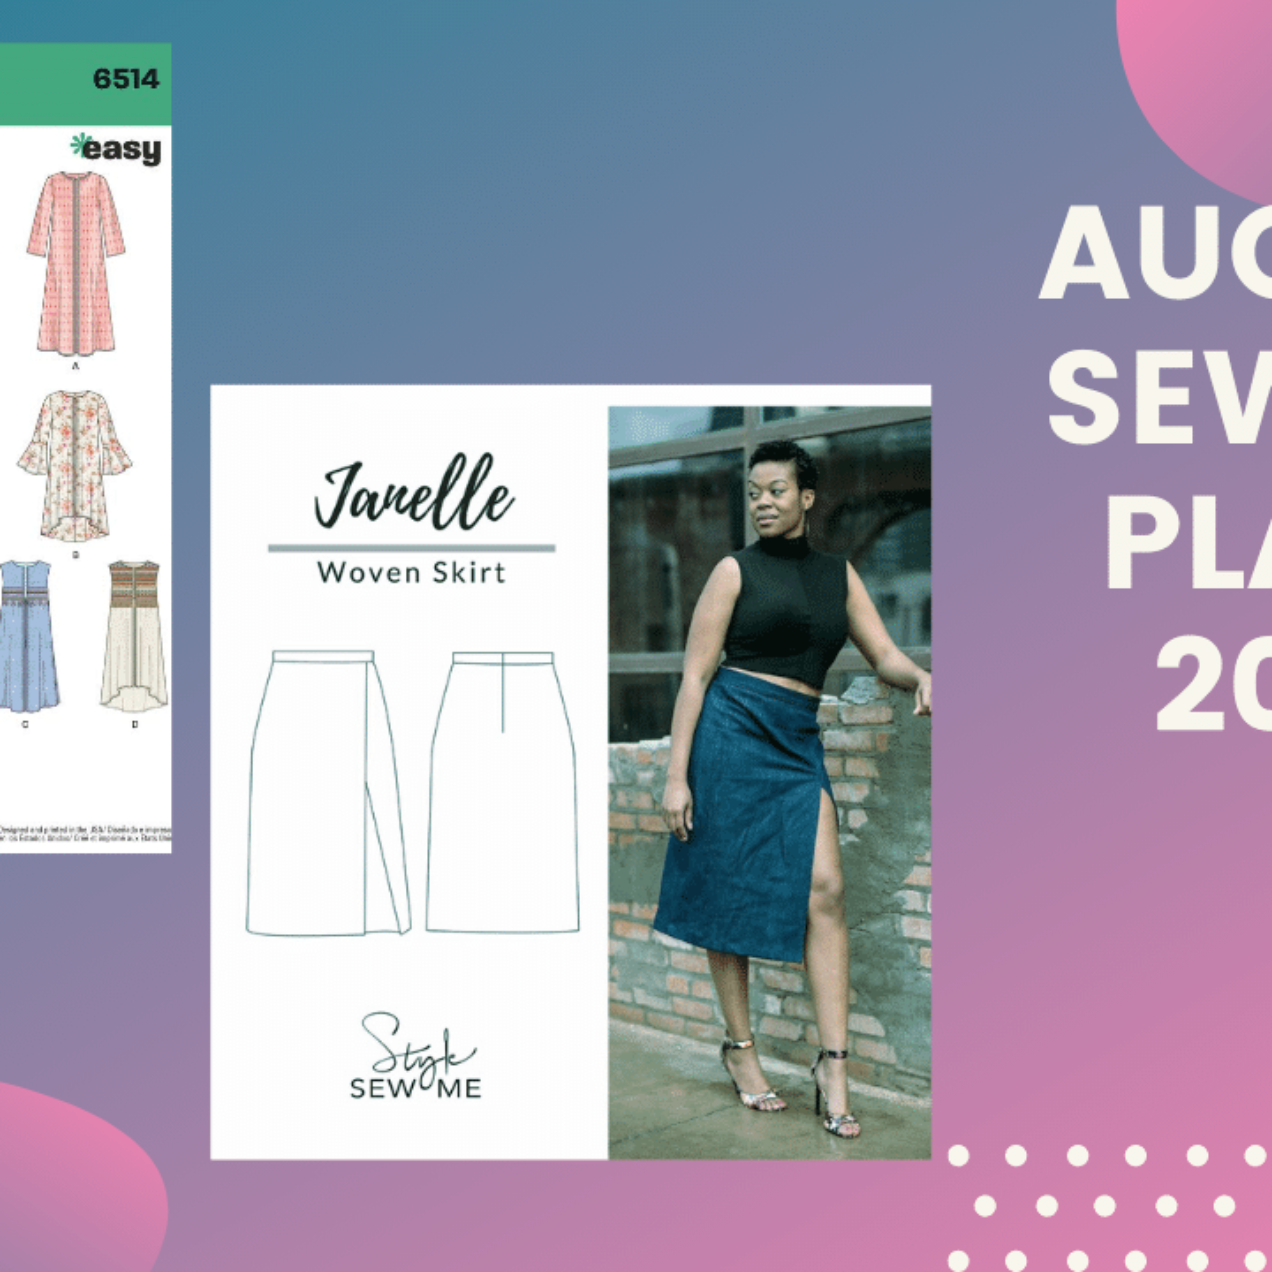 August Sewing Plans 2020